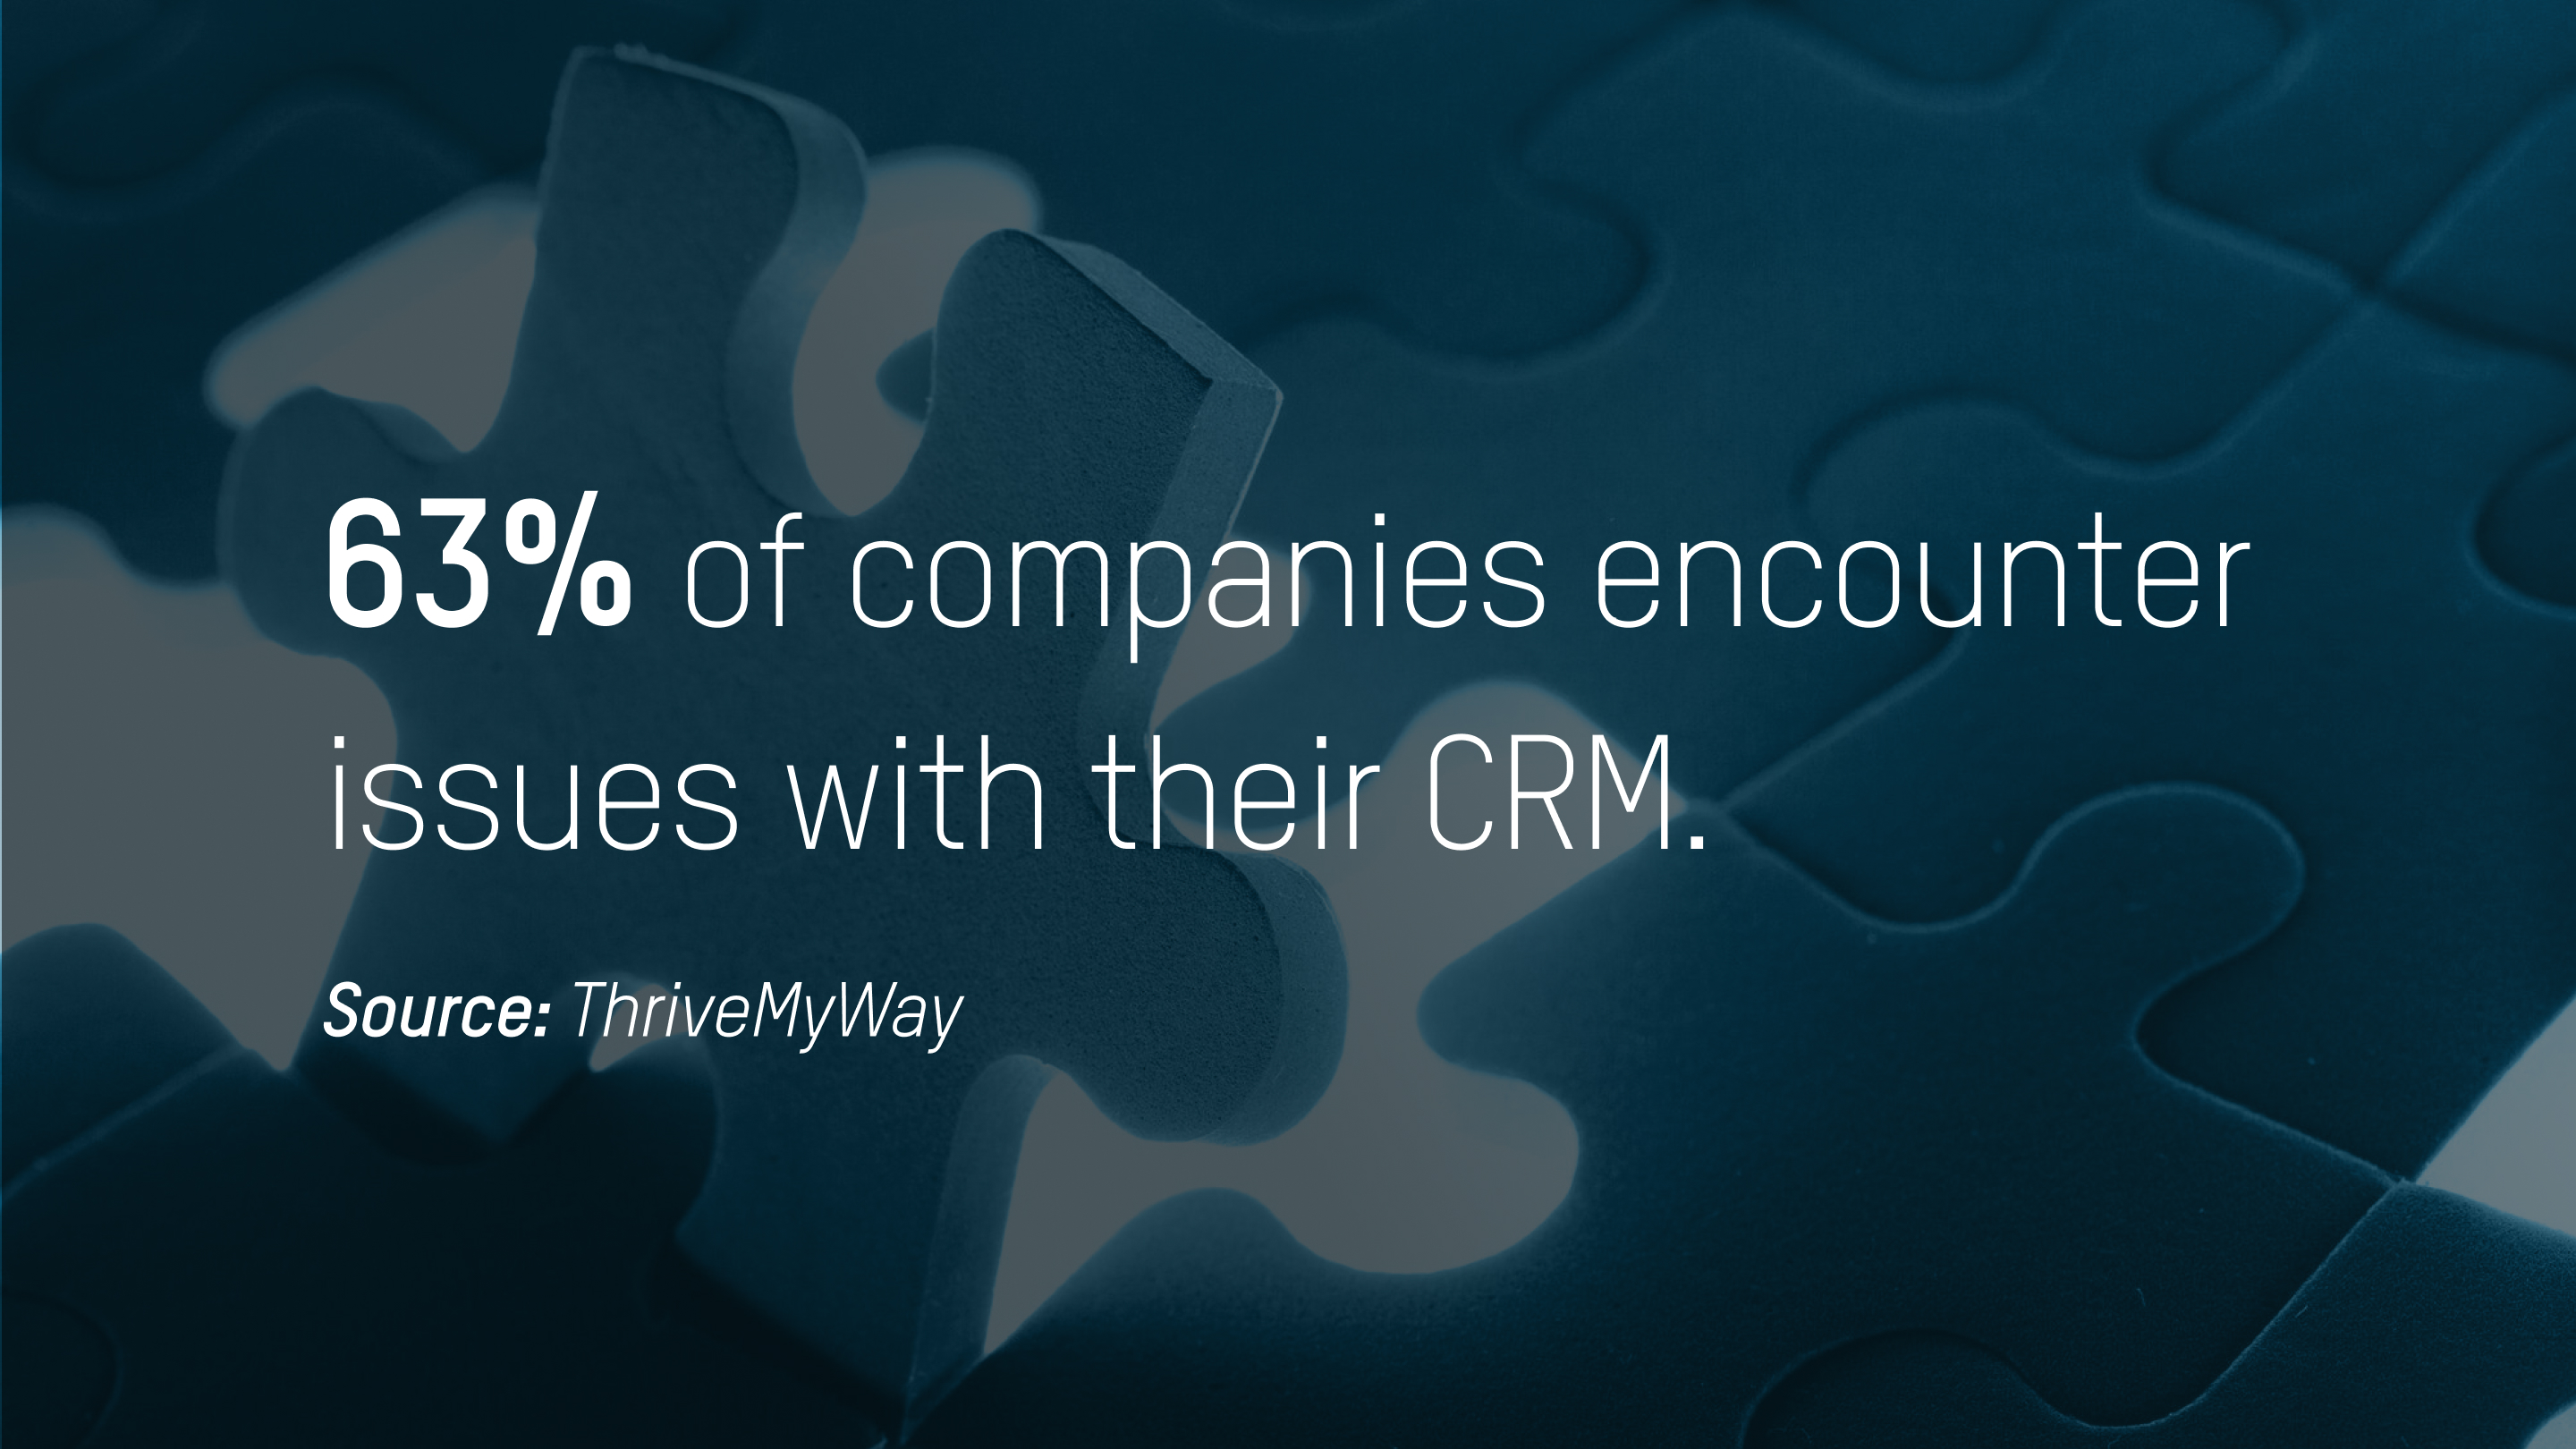 63% of companies encounter issues with their CRM.